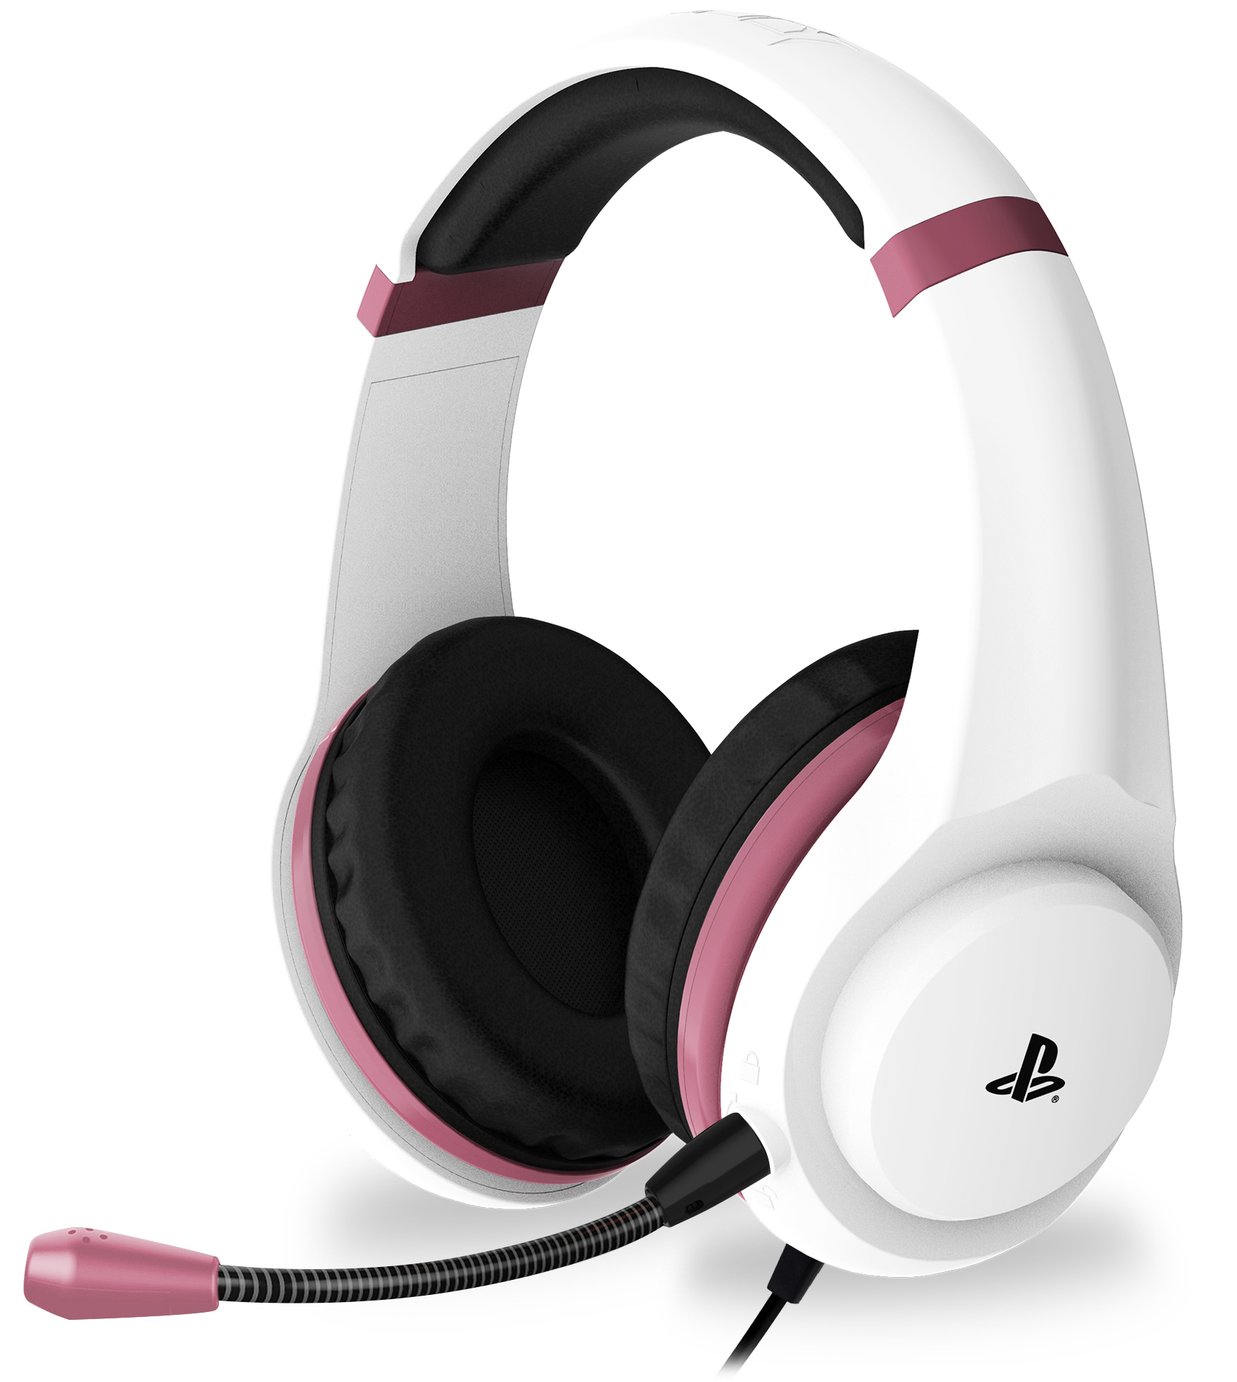 4Gamers Officially Licensed PS4 Headset - Rose Gold